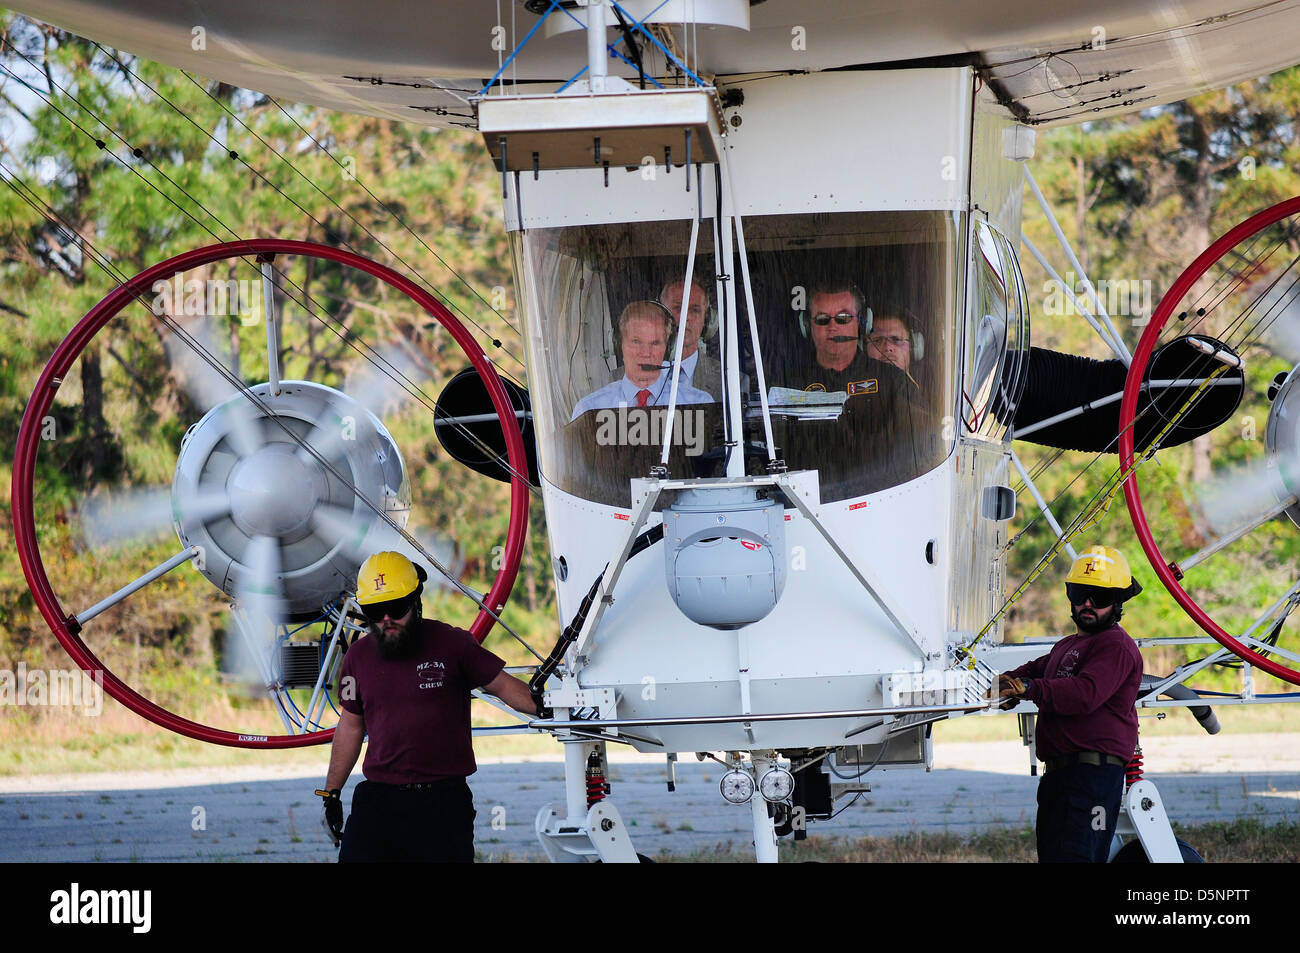 US Senator Bill Nelson, left, takes a familiarization flight aboard the Navy’s only manned airship the MZ-3A moored at Fernandina Beach Municipal Airport April 3, 2013 in Fernandina, Florida. The airship is a test platform for surveillance cameras, radars and other sensors. Stock Photo